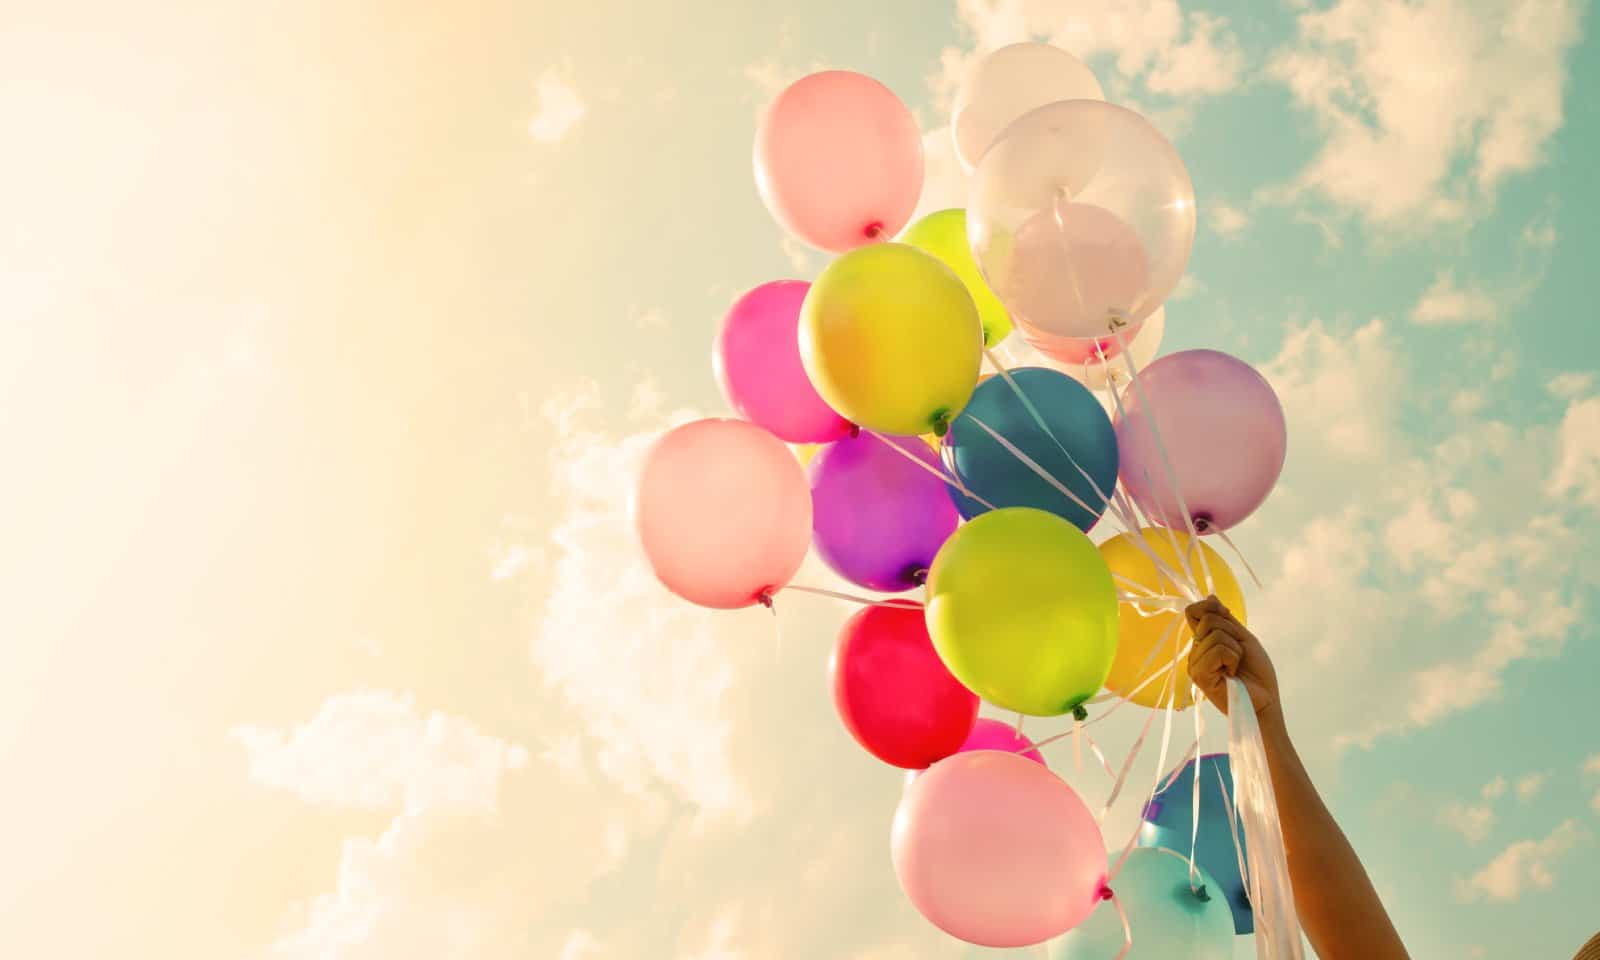 Image Credit: Shutterstock / jakkapan <p><span>Popping balloons to find hidden prizes inside can be thrilling for kids and adults alike, offering a surprise element and lots of fun in discovering what’s inside each balloon.</span></p>